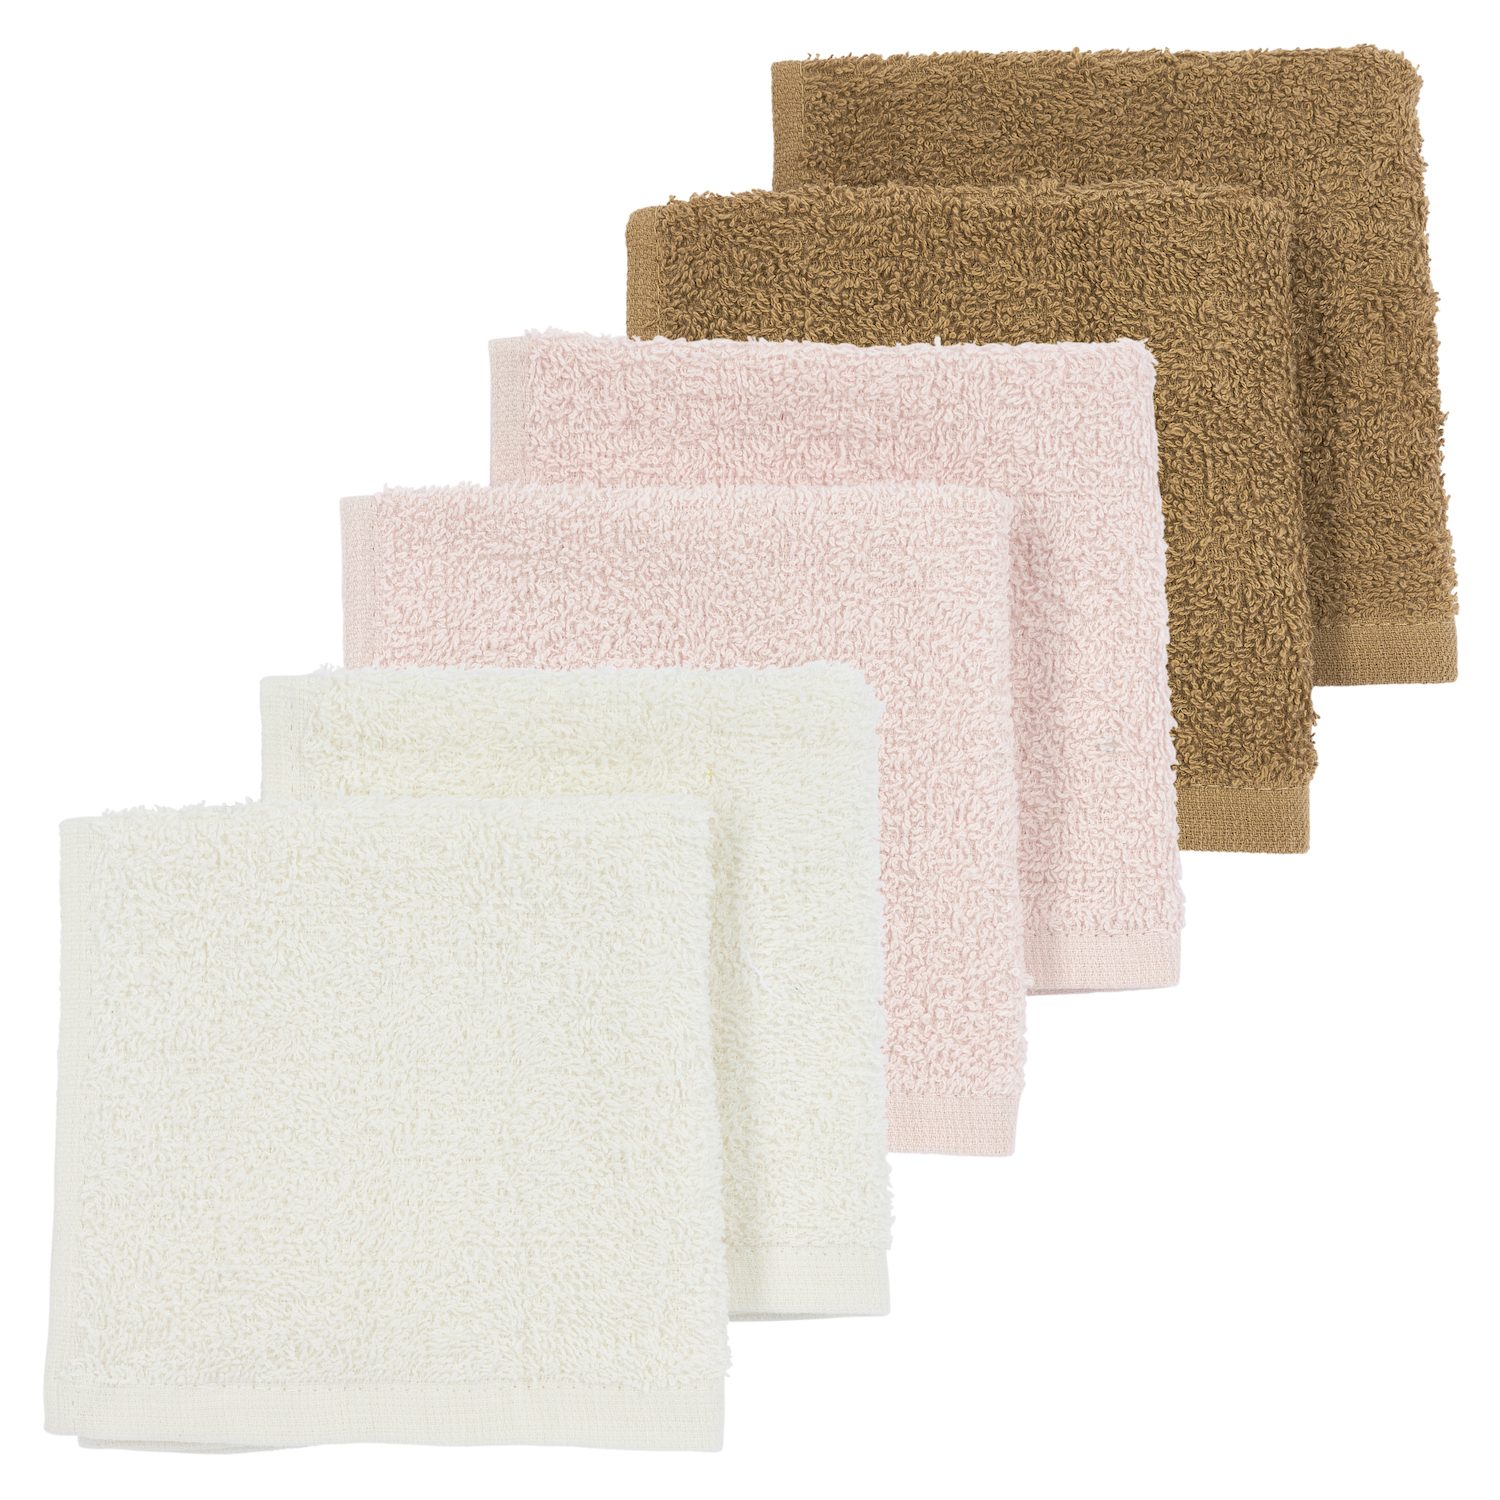 Facecloth 6-pack terry Uni - offwhite/soft pink/toffee - 30x30cm